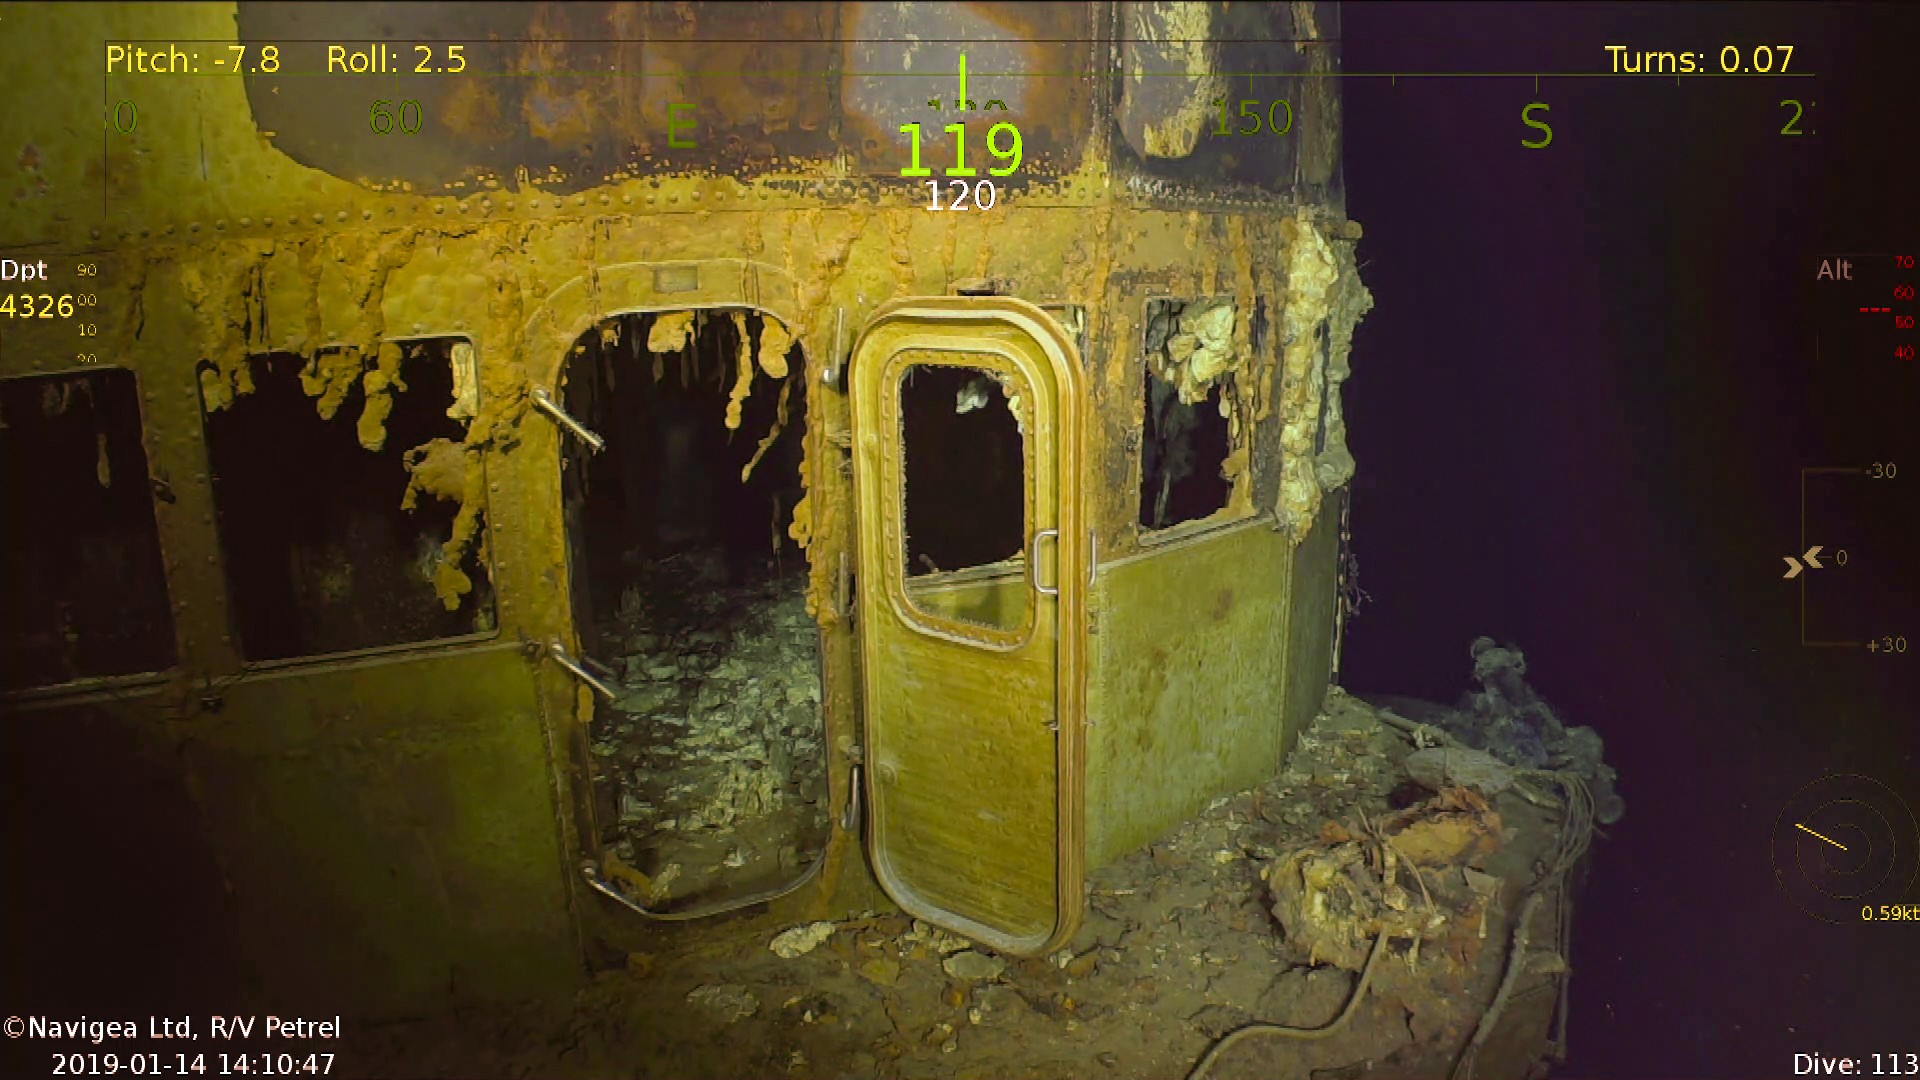 Paul Allen’s sea exploration venture found a WWII aircraft carrier, the USS Wasp, in January. The carrier sunk in the Coral Sea on September 15, 1941.